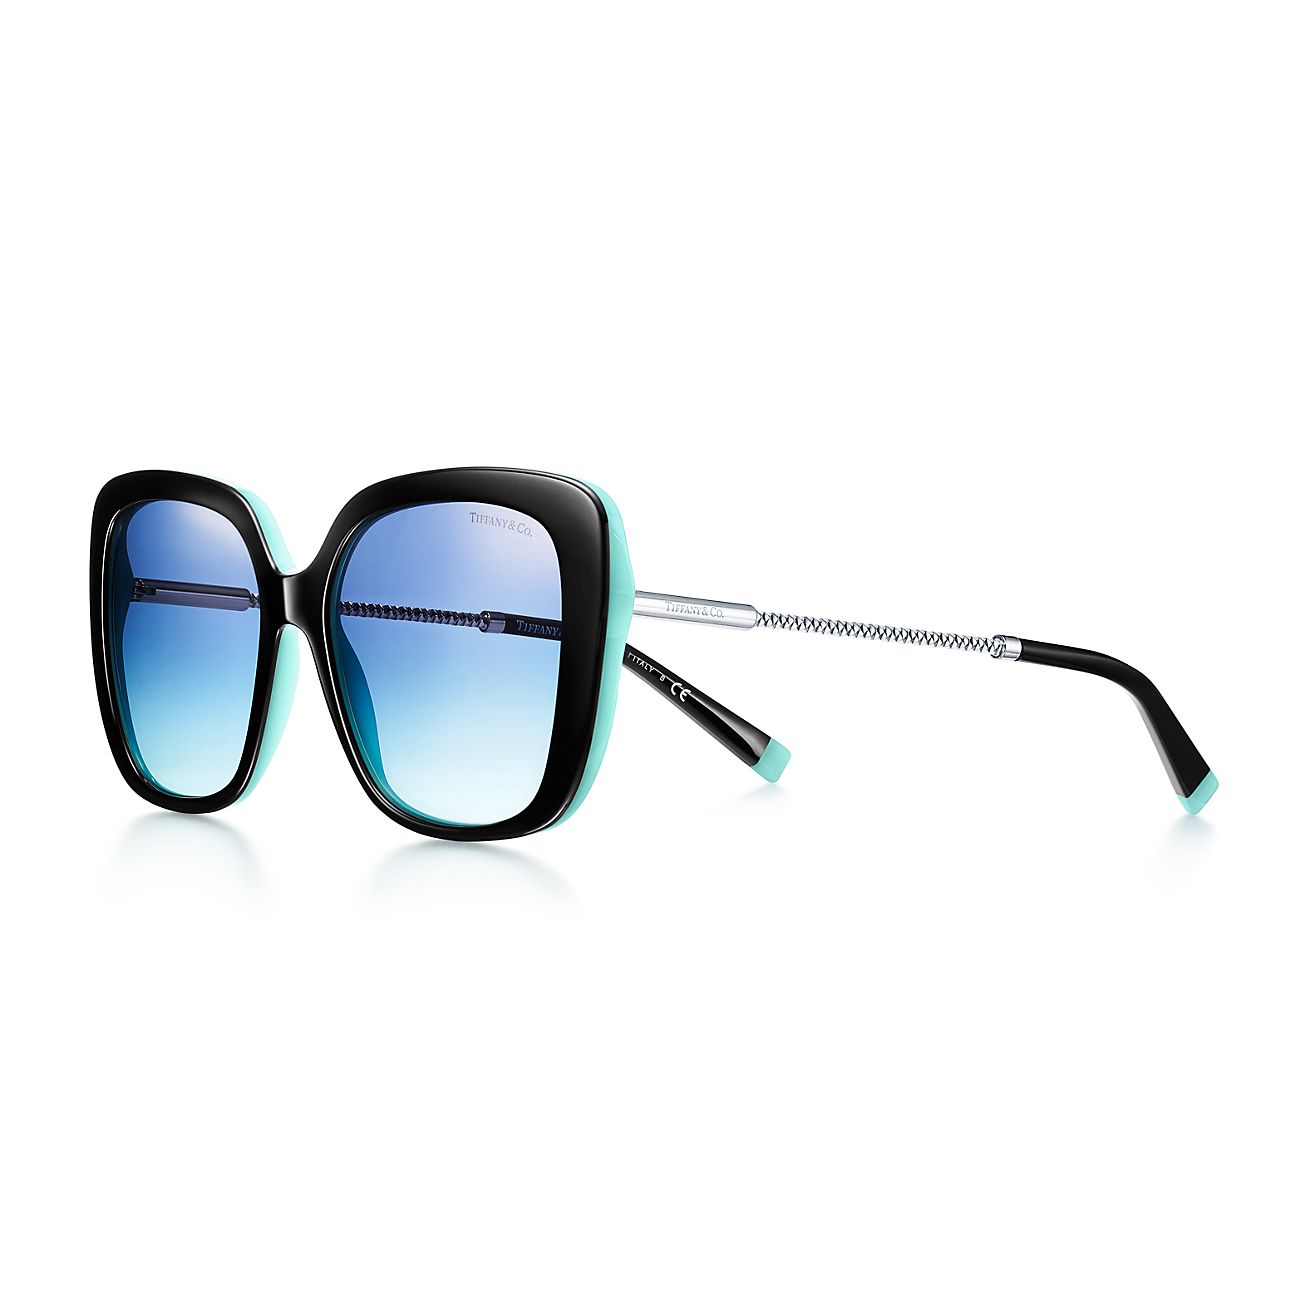 Diamond Point Butterfly Sunglasses in Black and Tiffany Blue